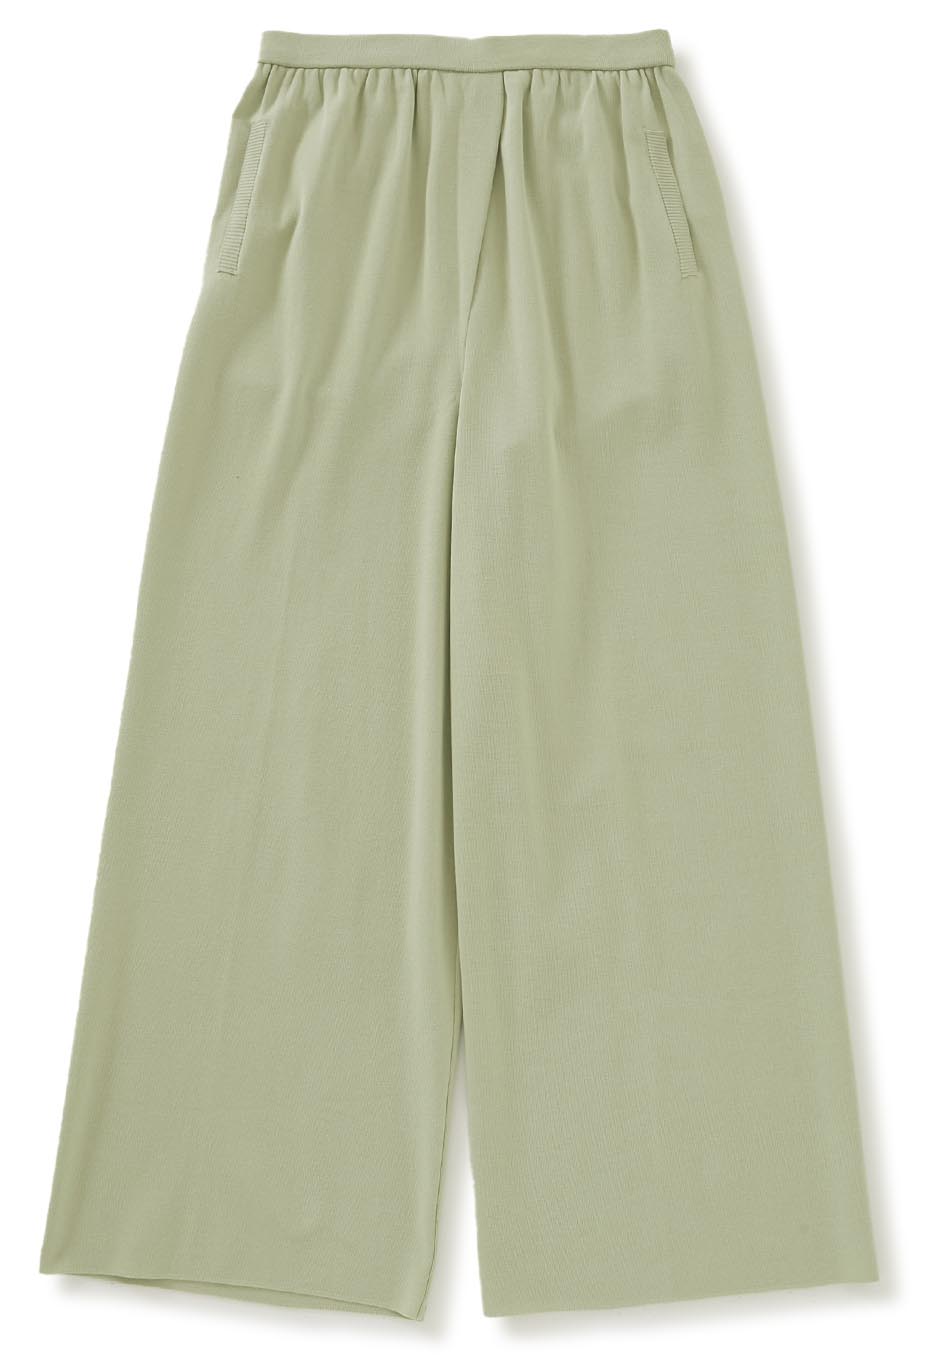 CT PLAGE rayon Polyester Knit wide pants